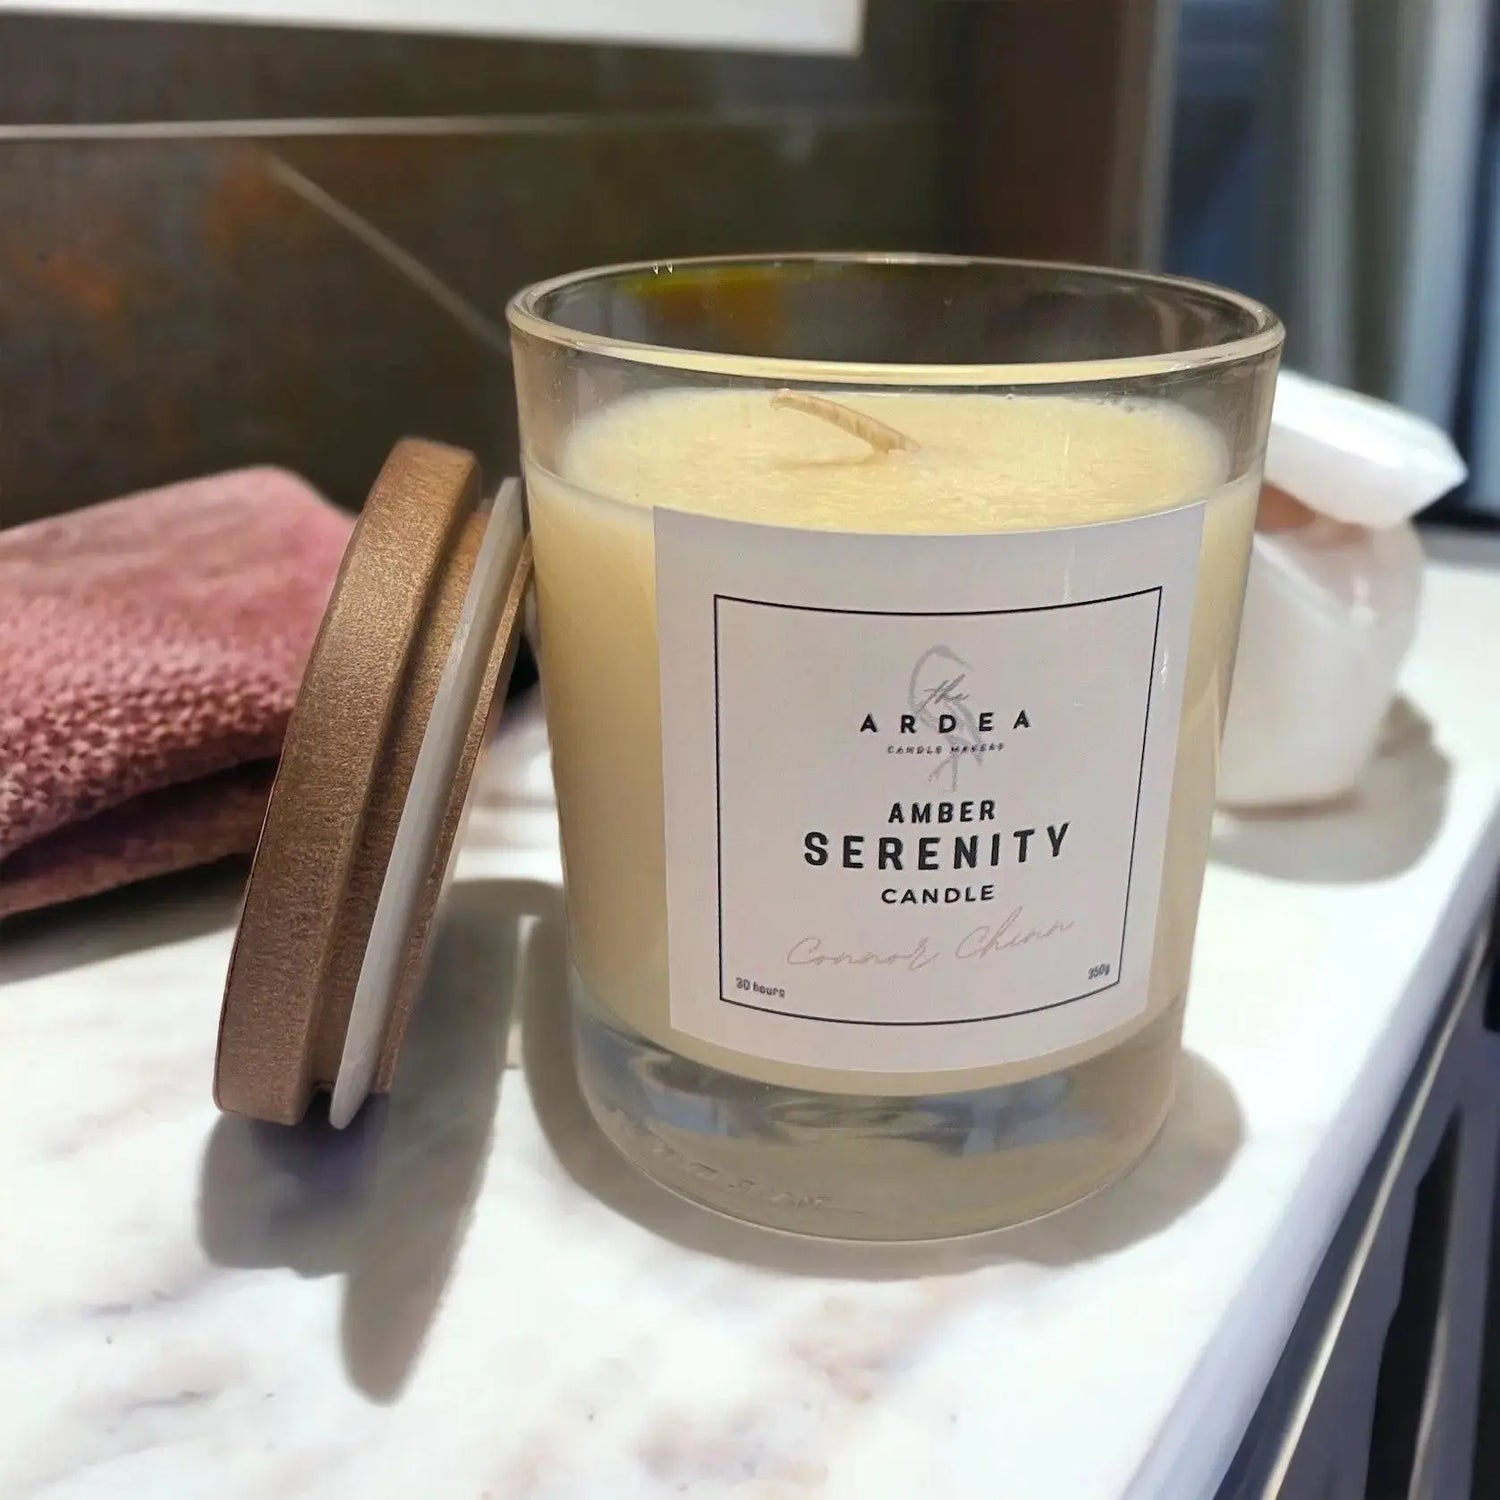 Amber Serenity Candle - 420g - The Ardea Candle Makers